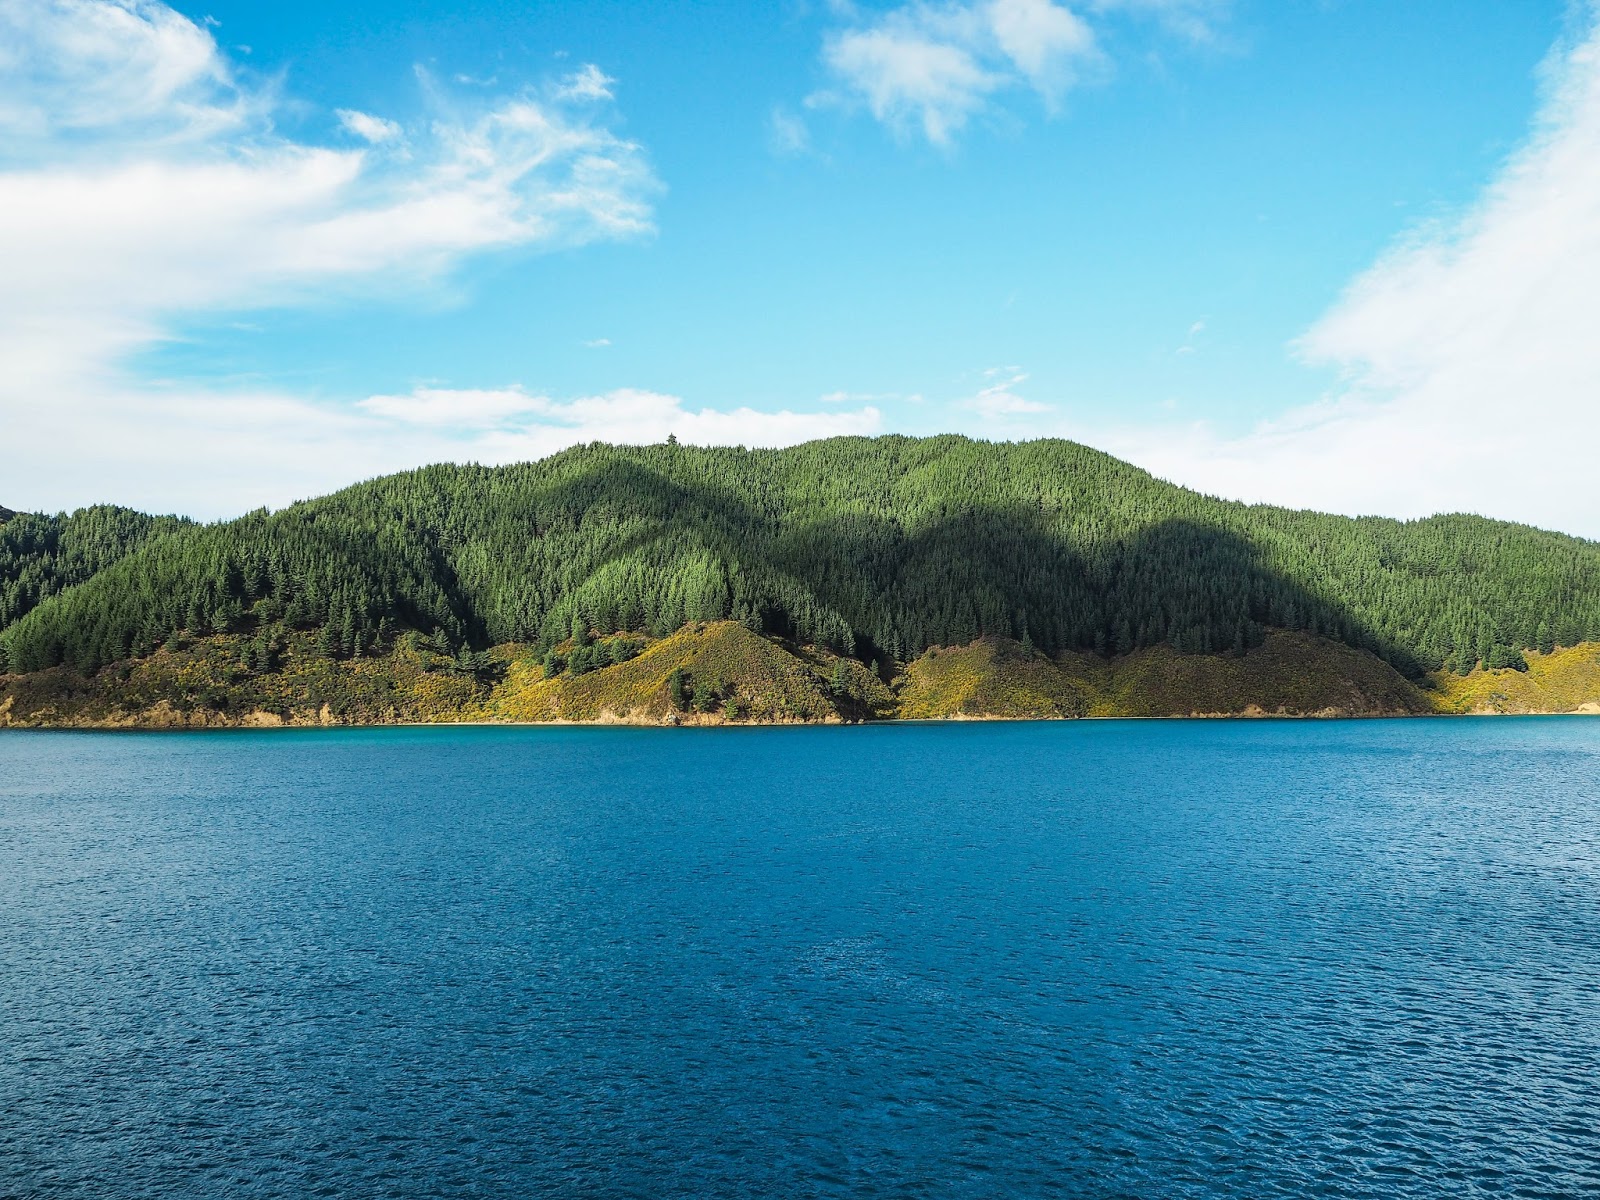 View of Marlborough Sounds from Cook Strait ferry, New Zealand